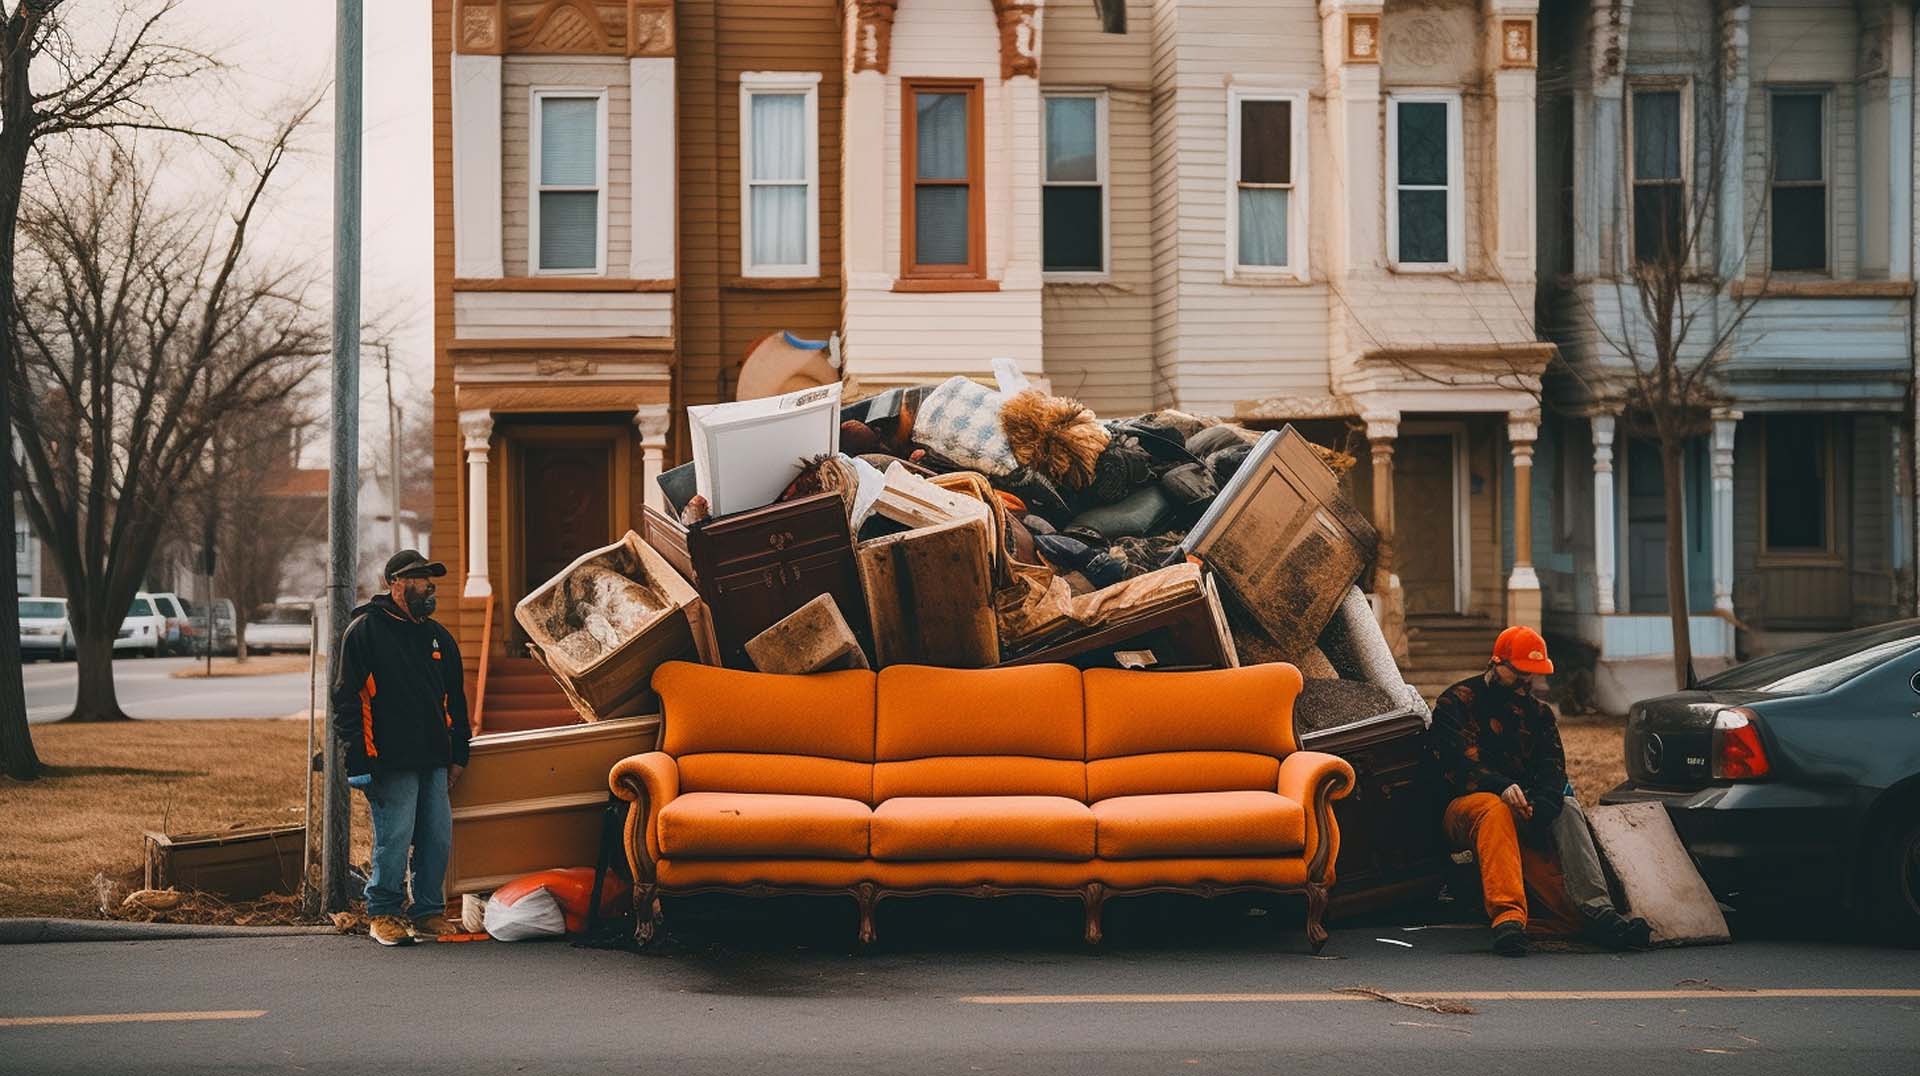 Residential Junk Removal Services in Bathurst